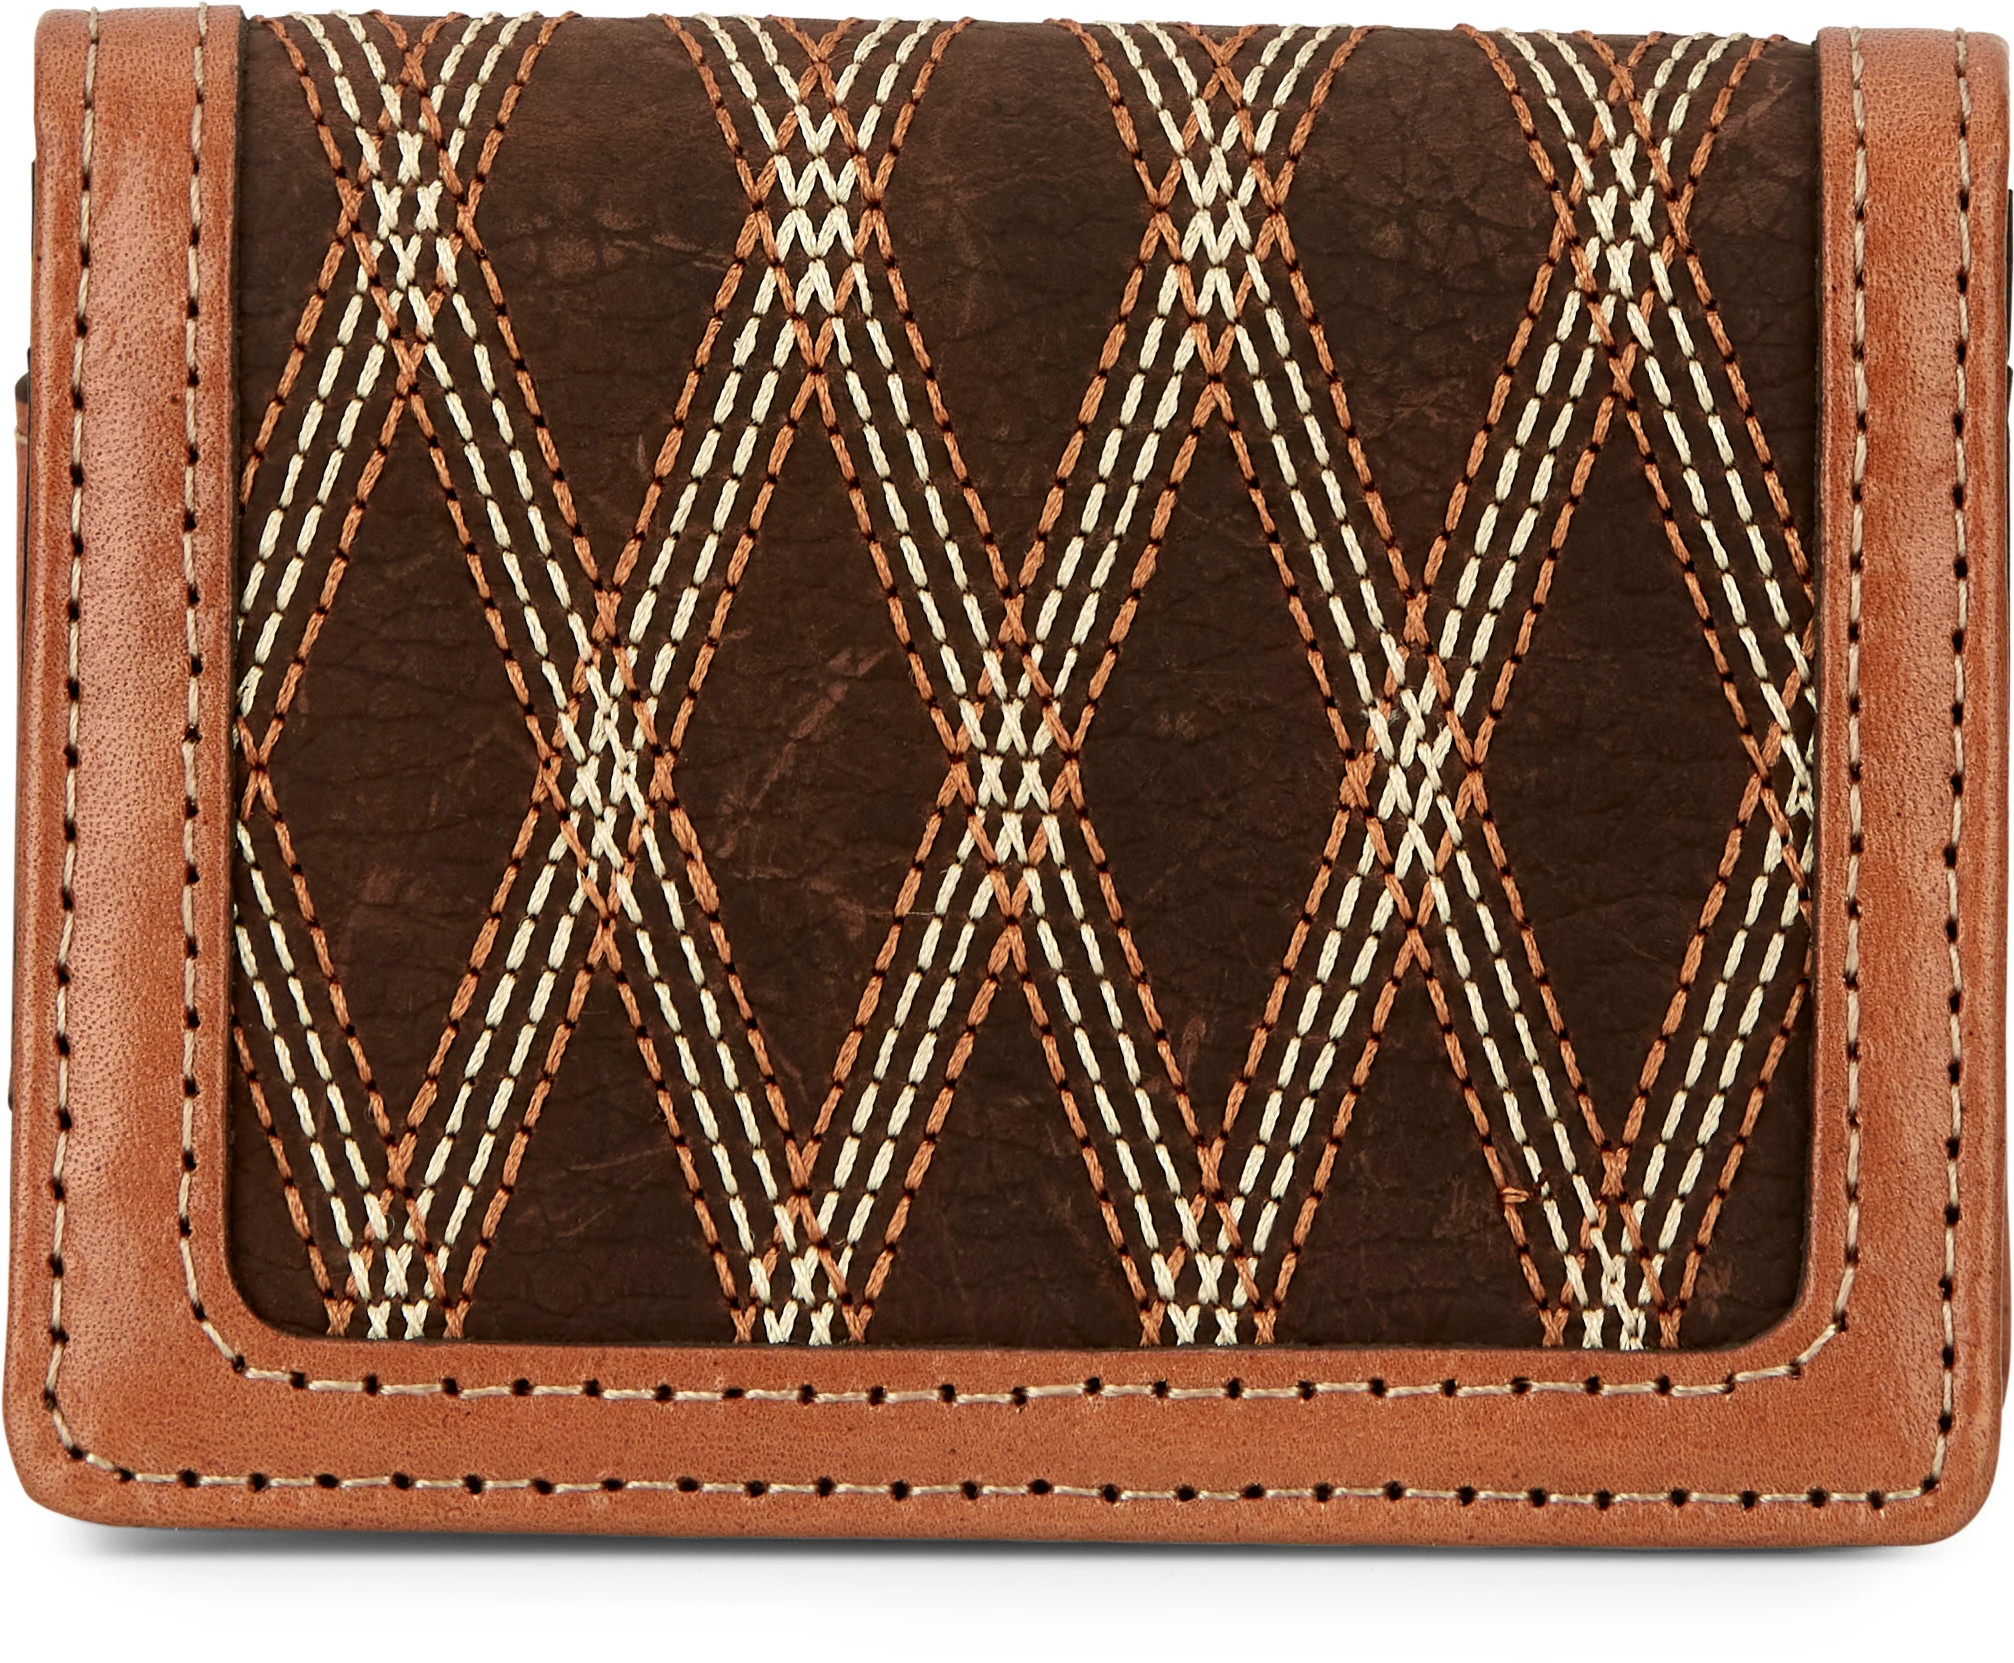 Justin Western Mens Wallet Trifold Leather Brown 1920568W3 